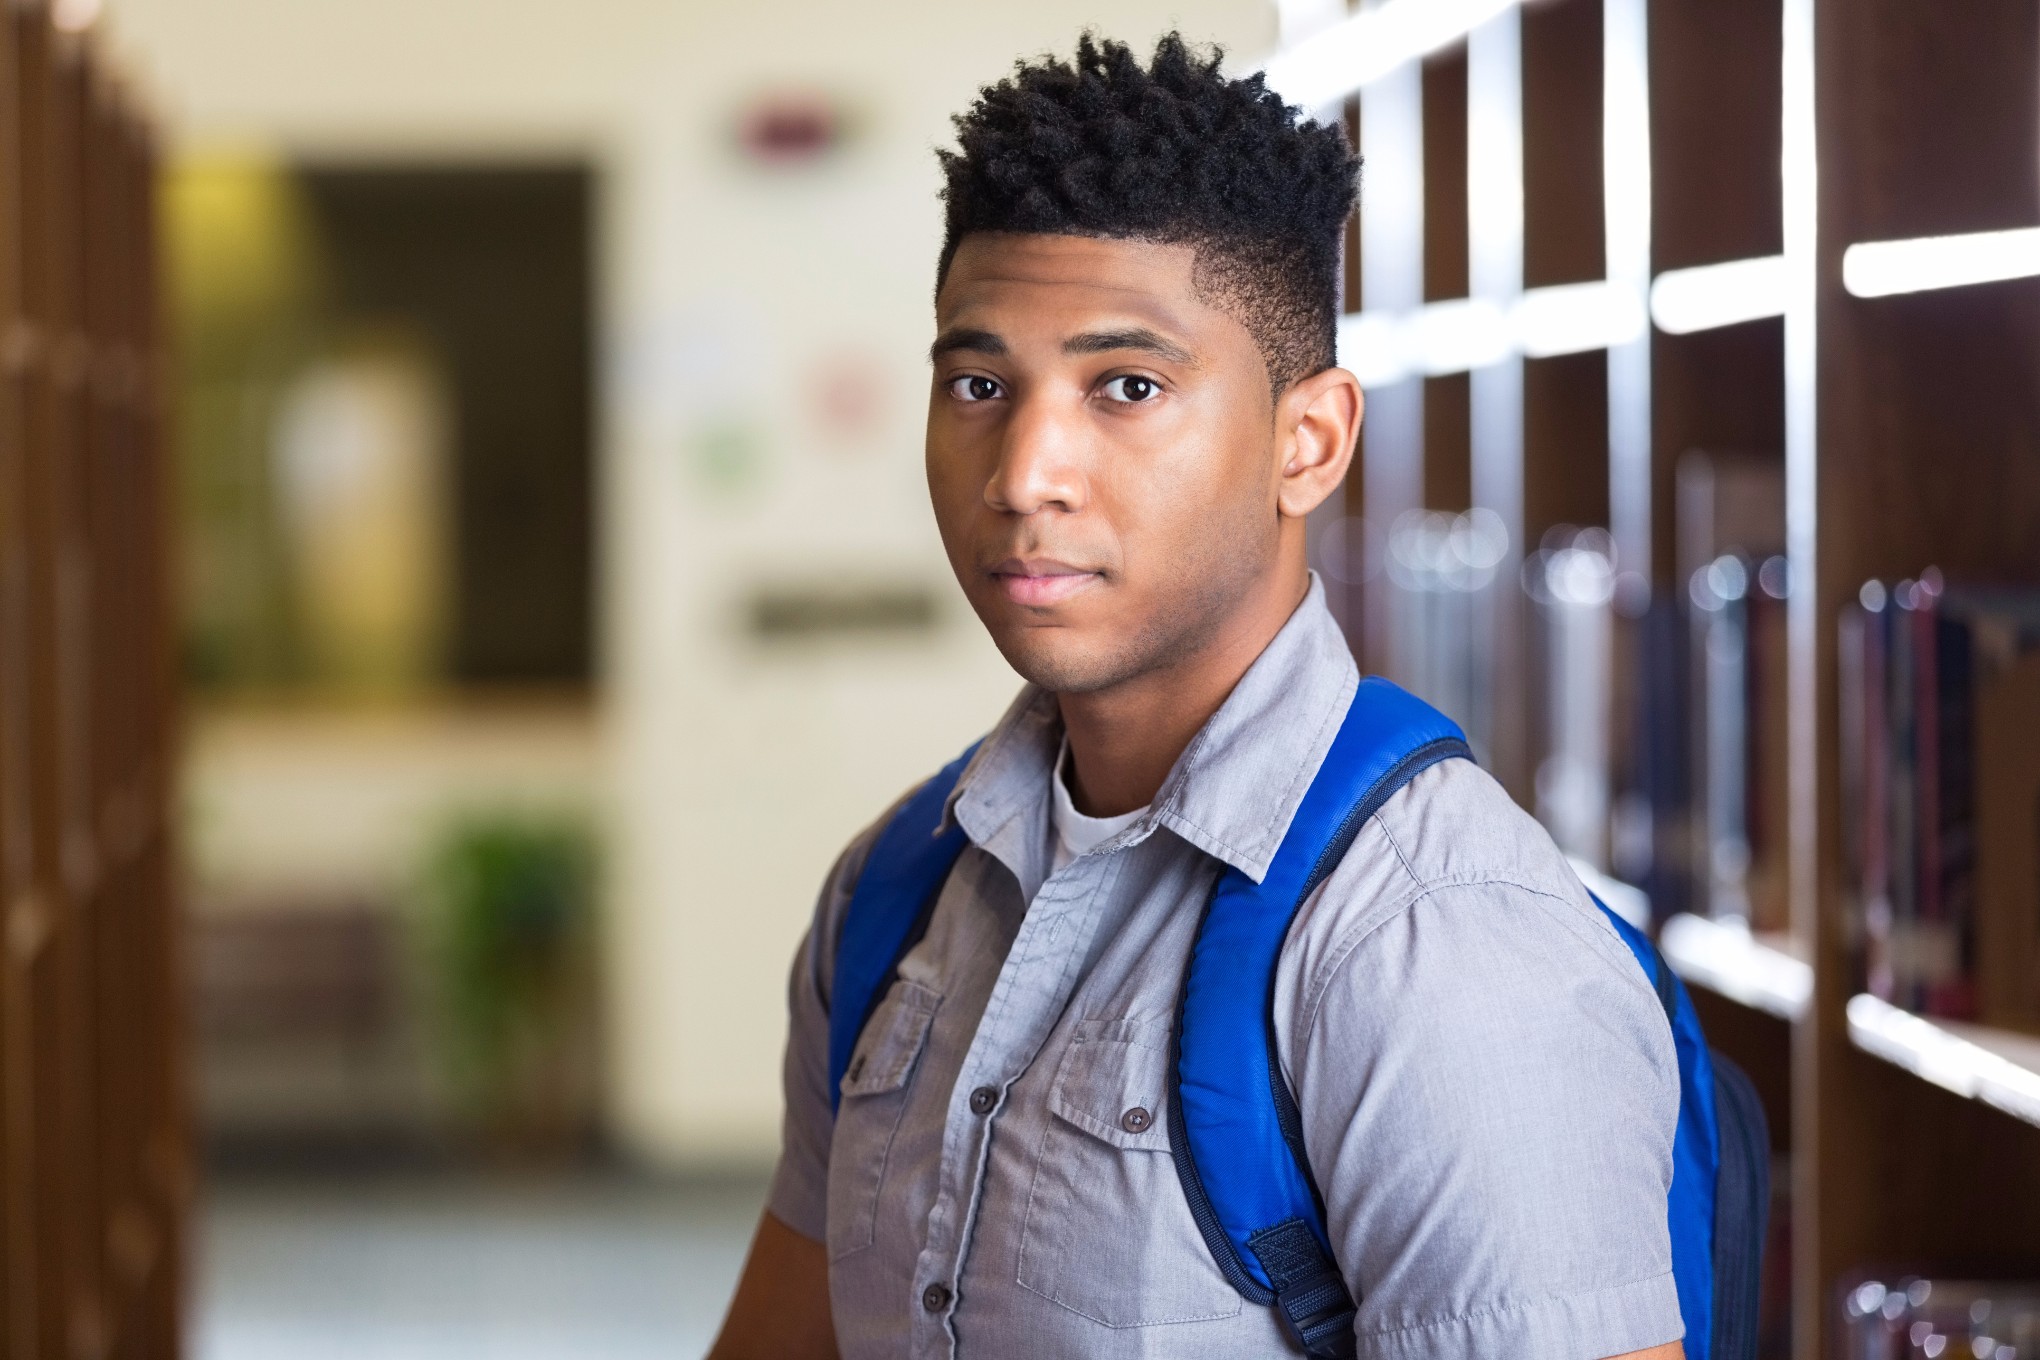 Teenage African American high school boy is looking at the camera with a serious expression. Student is standing in between rows of bookshelves in school library. He is wearing a backpack and casual shirt.